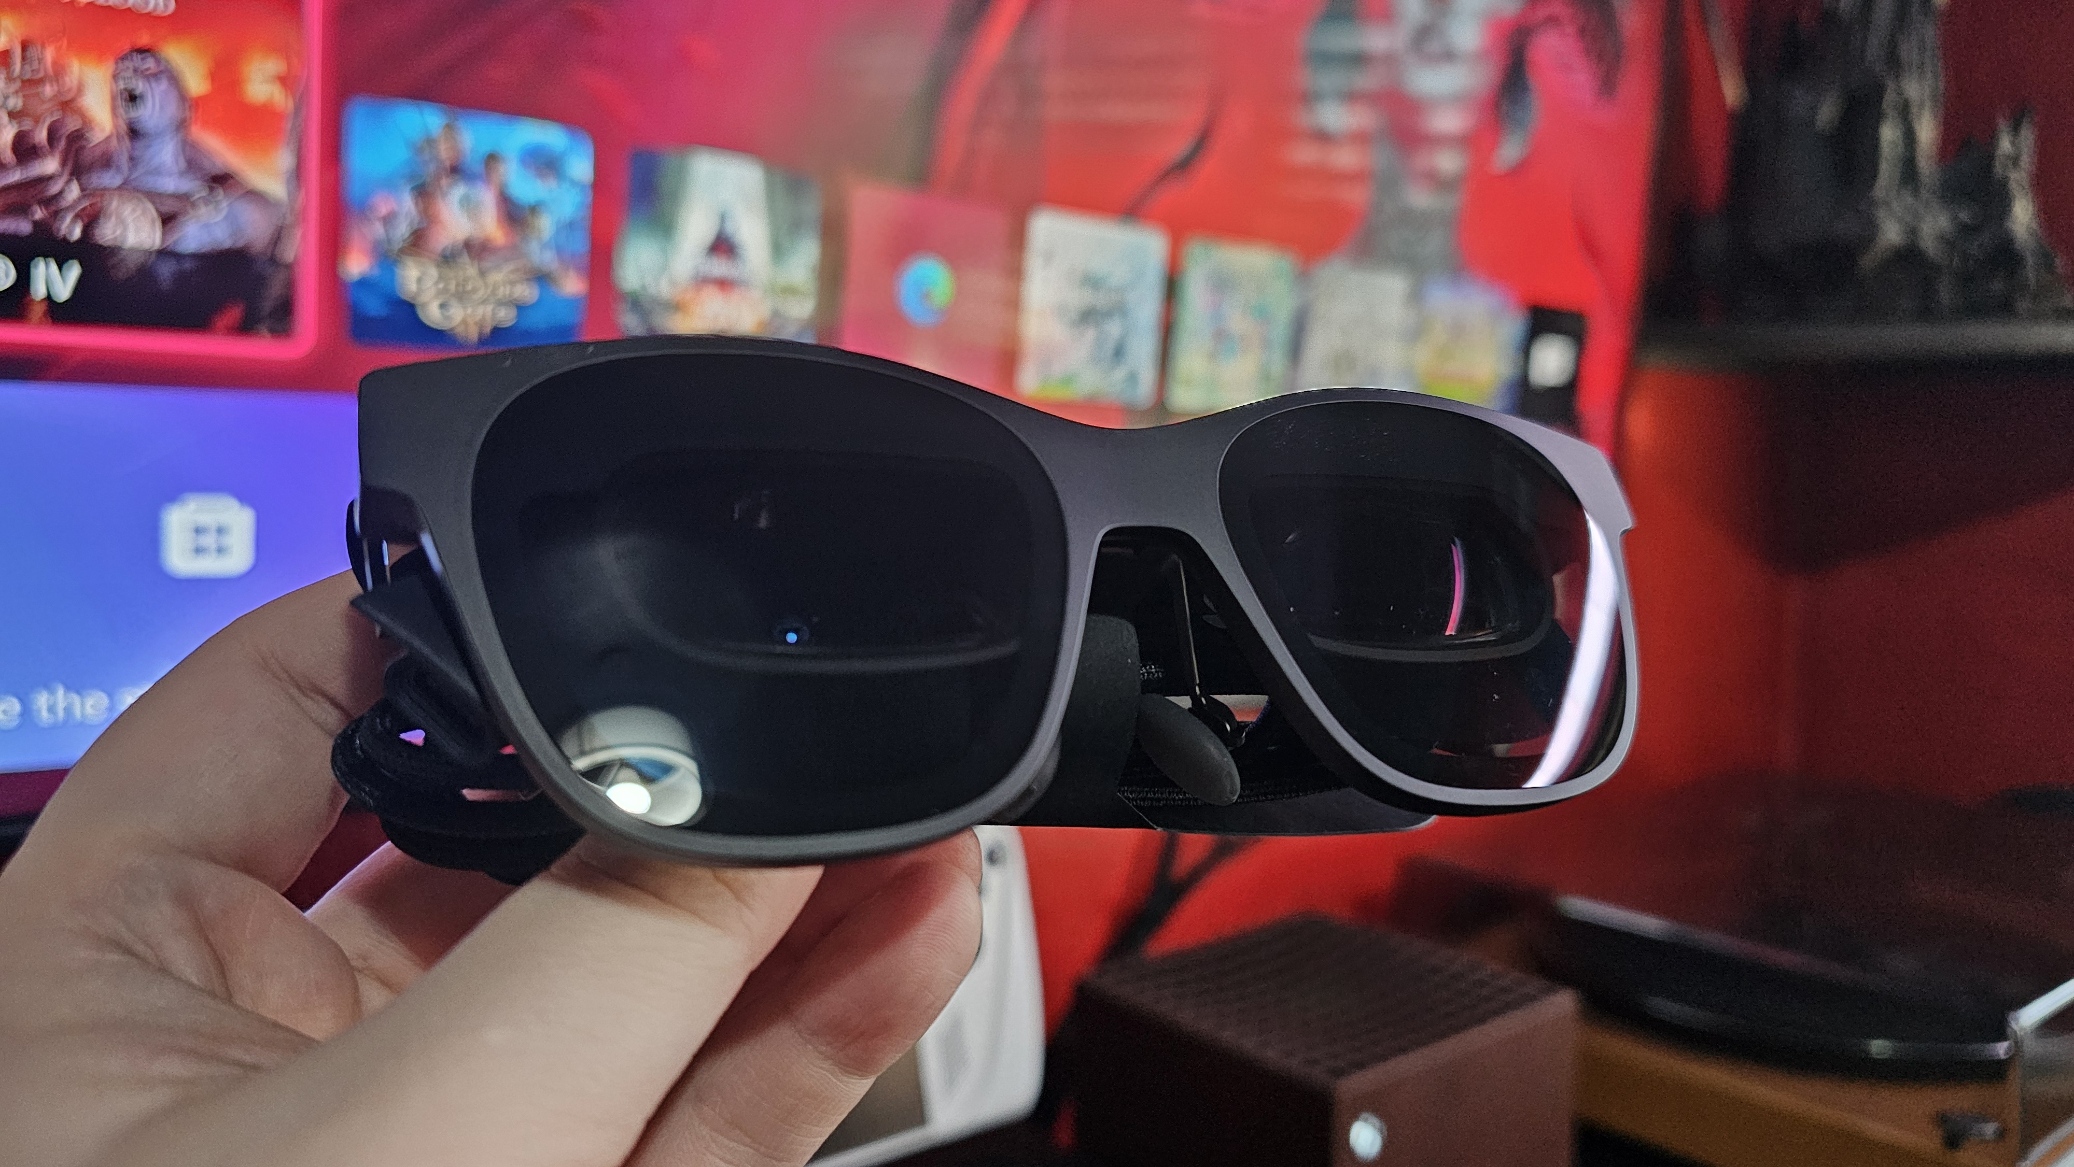 XREAL just fixed one of the biggest flaws of its AR glasses with a tiny accessory